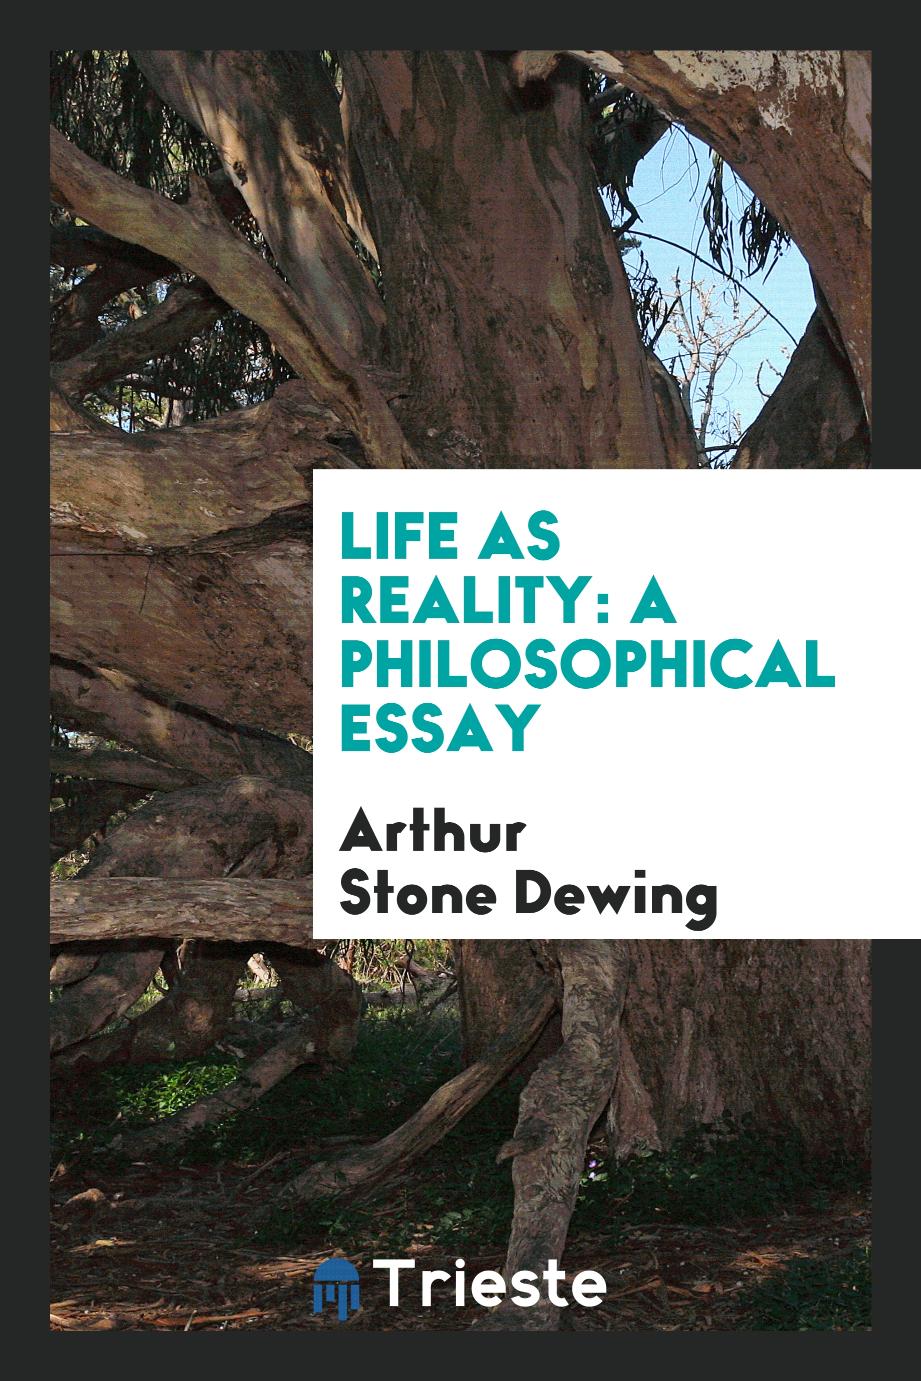 Life as Reality: A Philosophical Essay